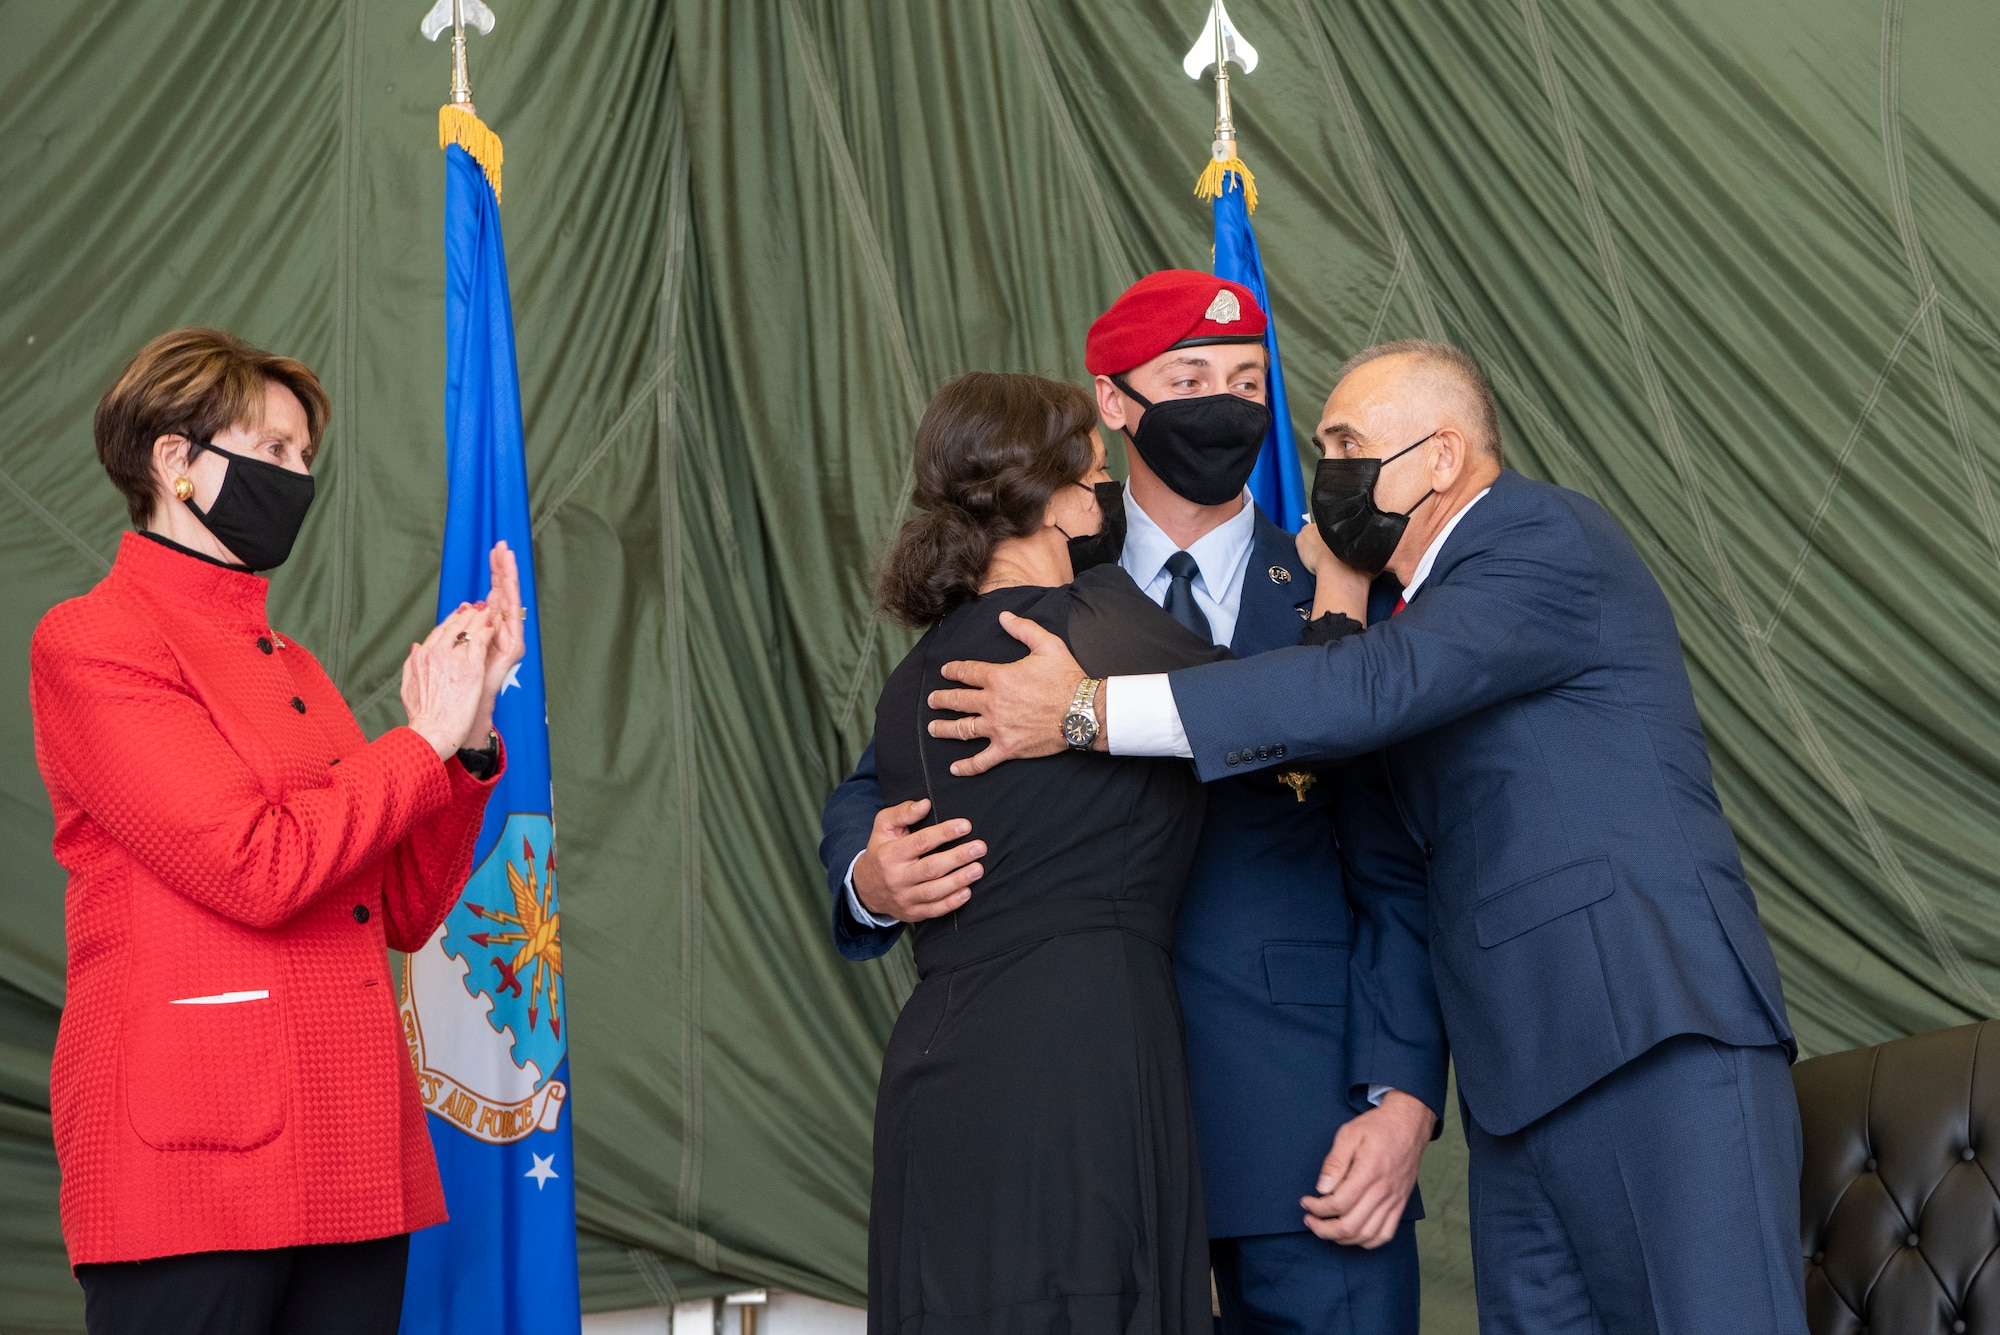 Barbara Barrett, Secretary of the Air Force, presented the medal to Staff Sgt. Alaxey Germanovich, 26th Special Tactics Squadron combat controller, for his actions during a fierce firefight in Nangarhar Province, Afghanistan, April 8, 2017. Germanovich’s efforts were credited with saving over 150 friendly forces and destroying 11 separate fighting positions.